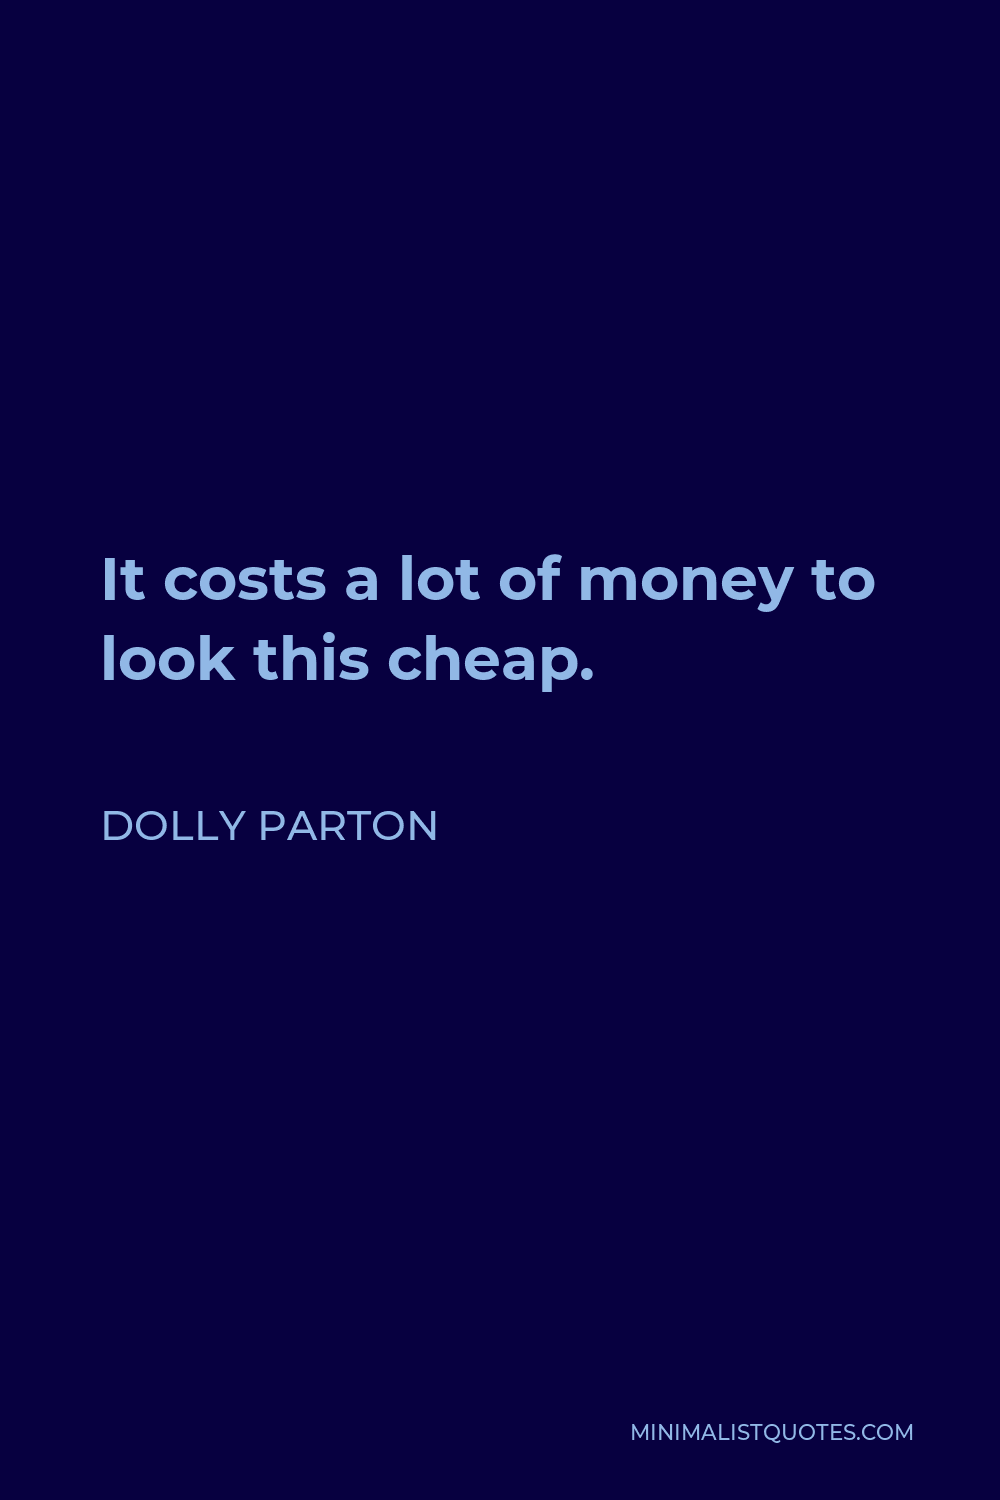 Dolly Parton Quote - It costs a lot of money to look this cheap.